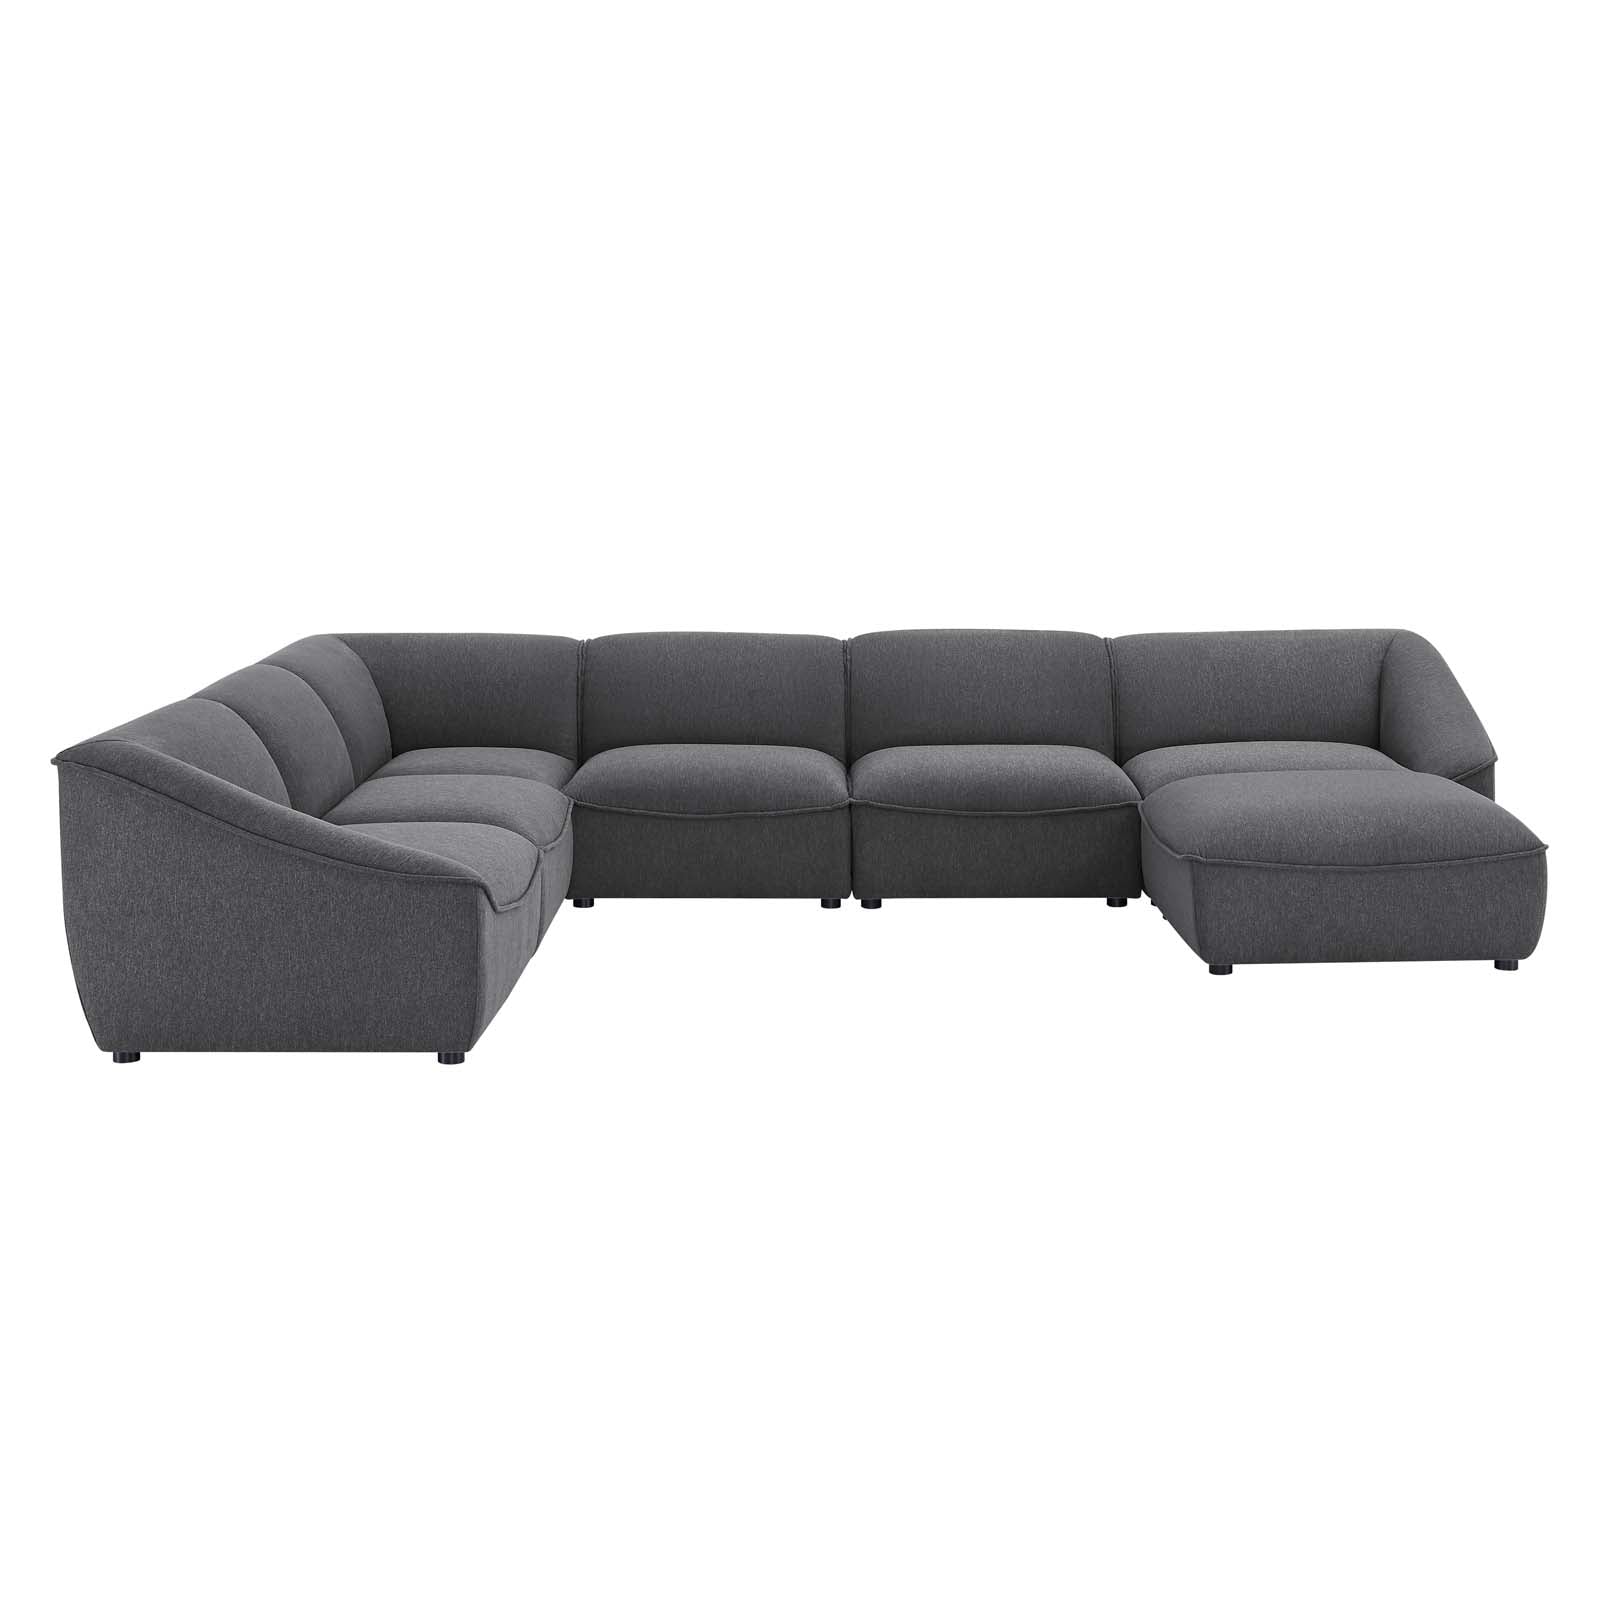 Modway Sectional Sofas - Comprise-7-Piece-Sectional-Sofa-Charcoal